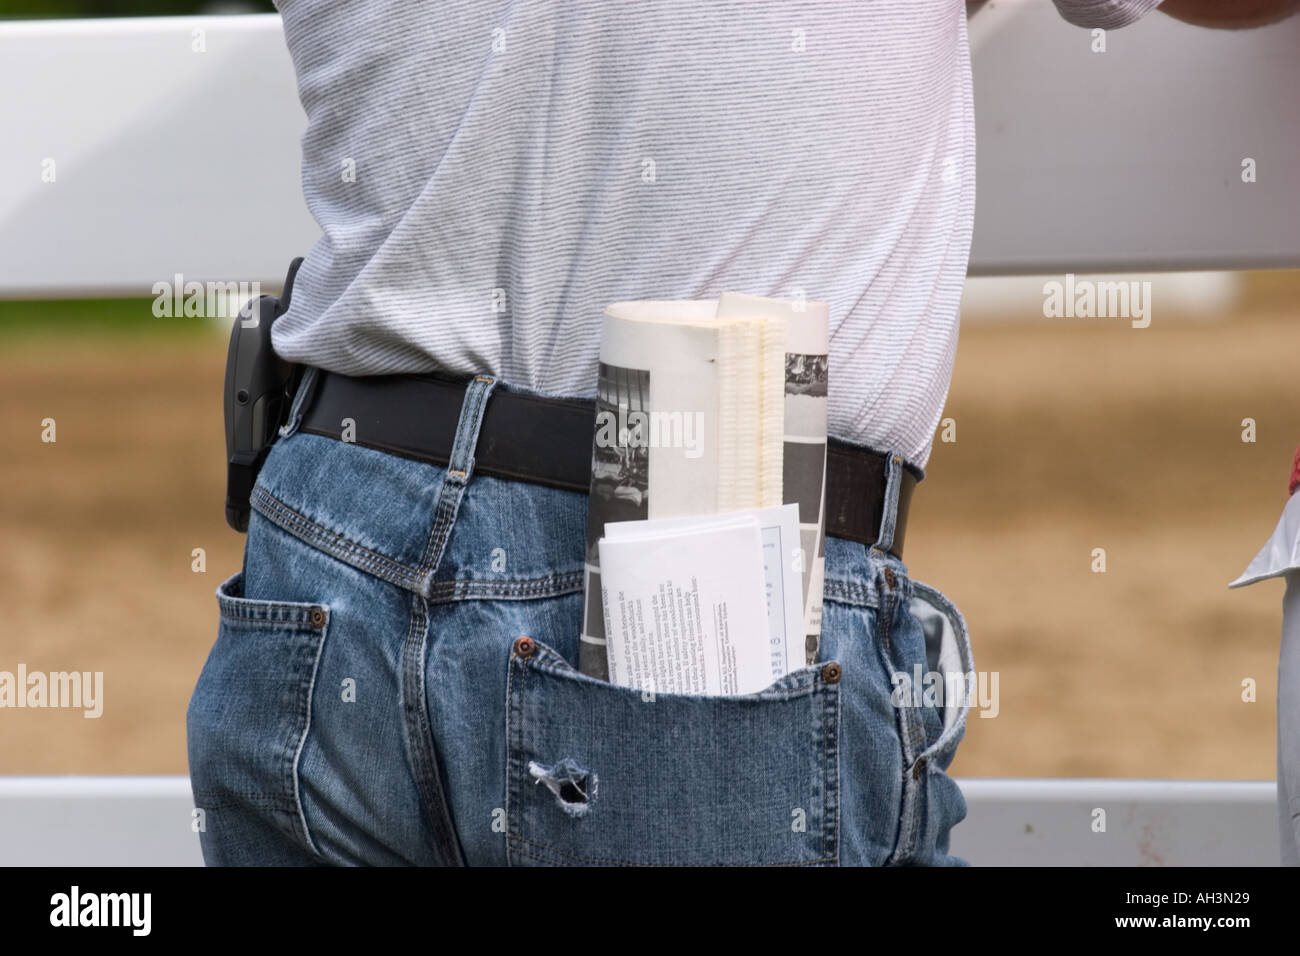 Man Carefully Places Piece Of Paper In Back Pocket To Make Sure It